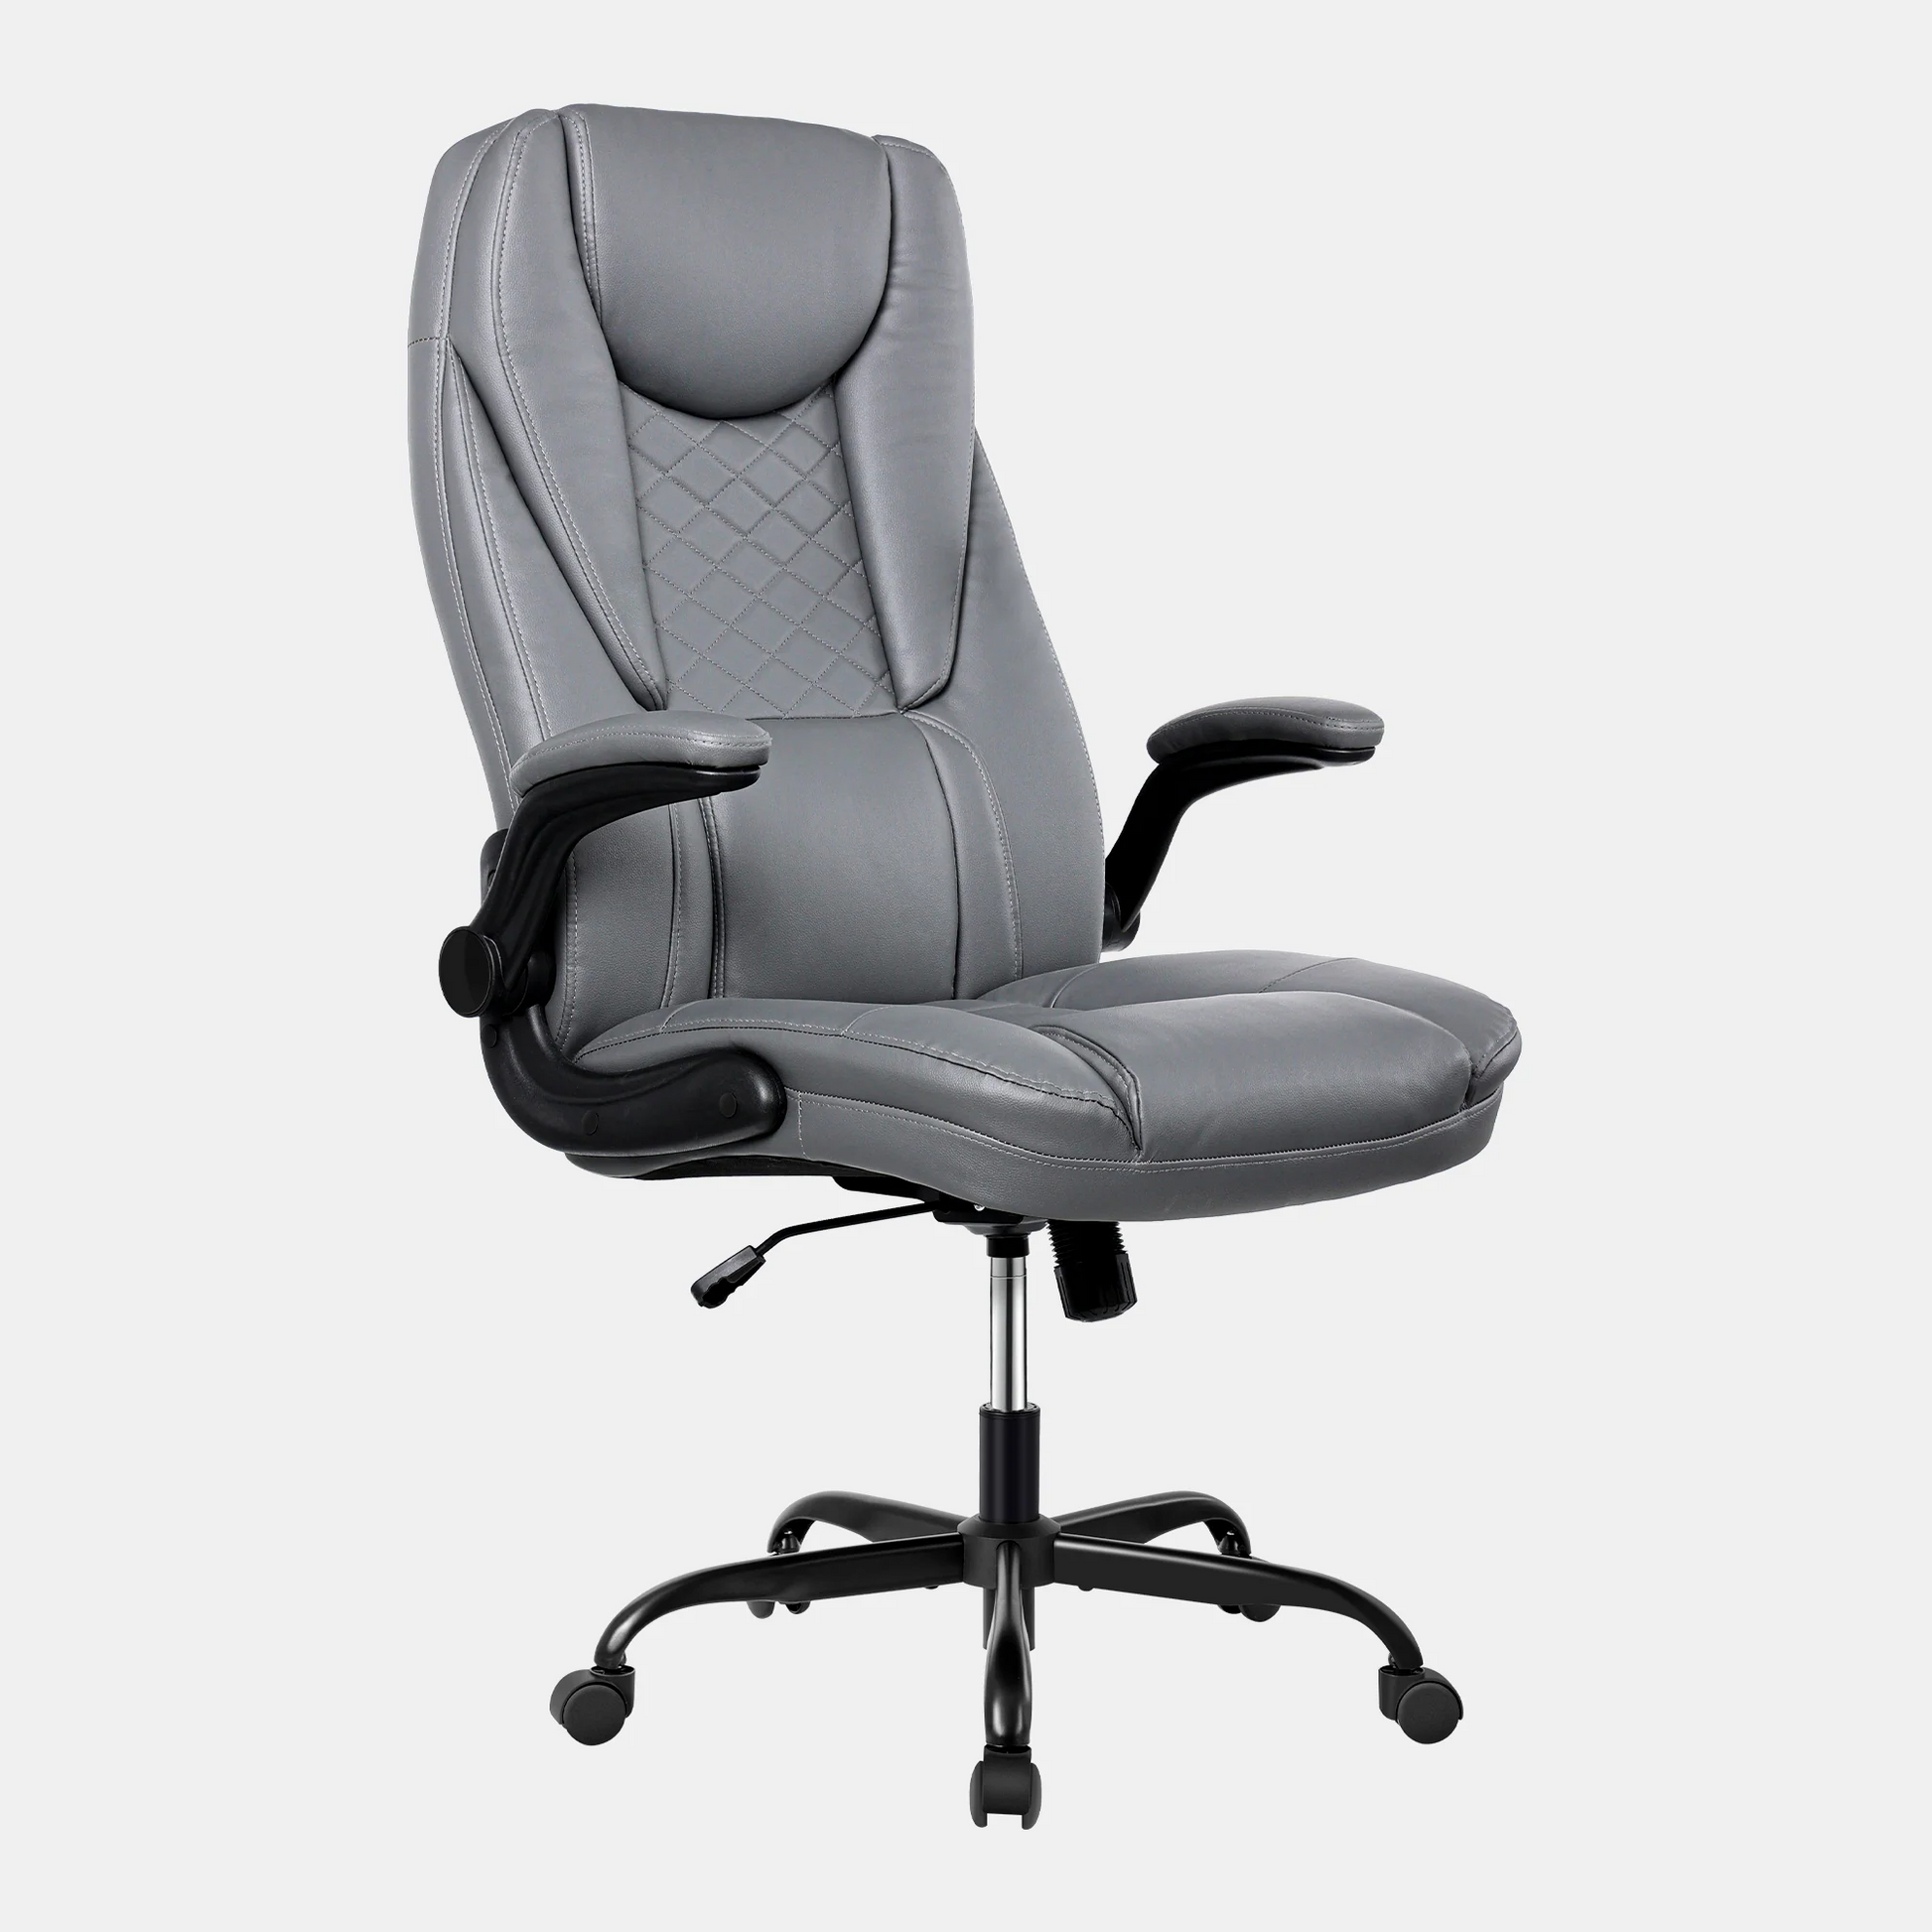 Ergonomic Leather Office Chair With Lumbar Support